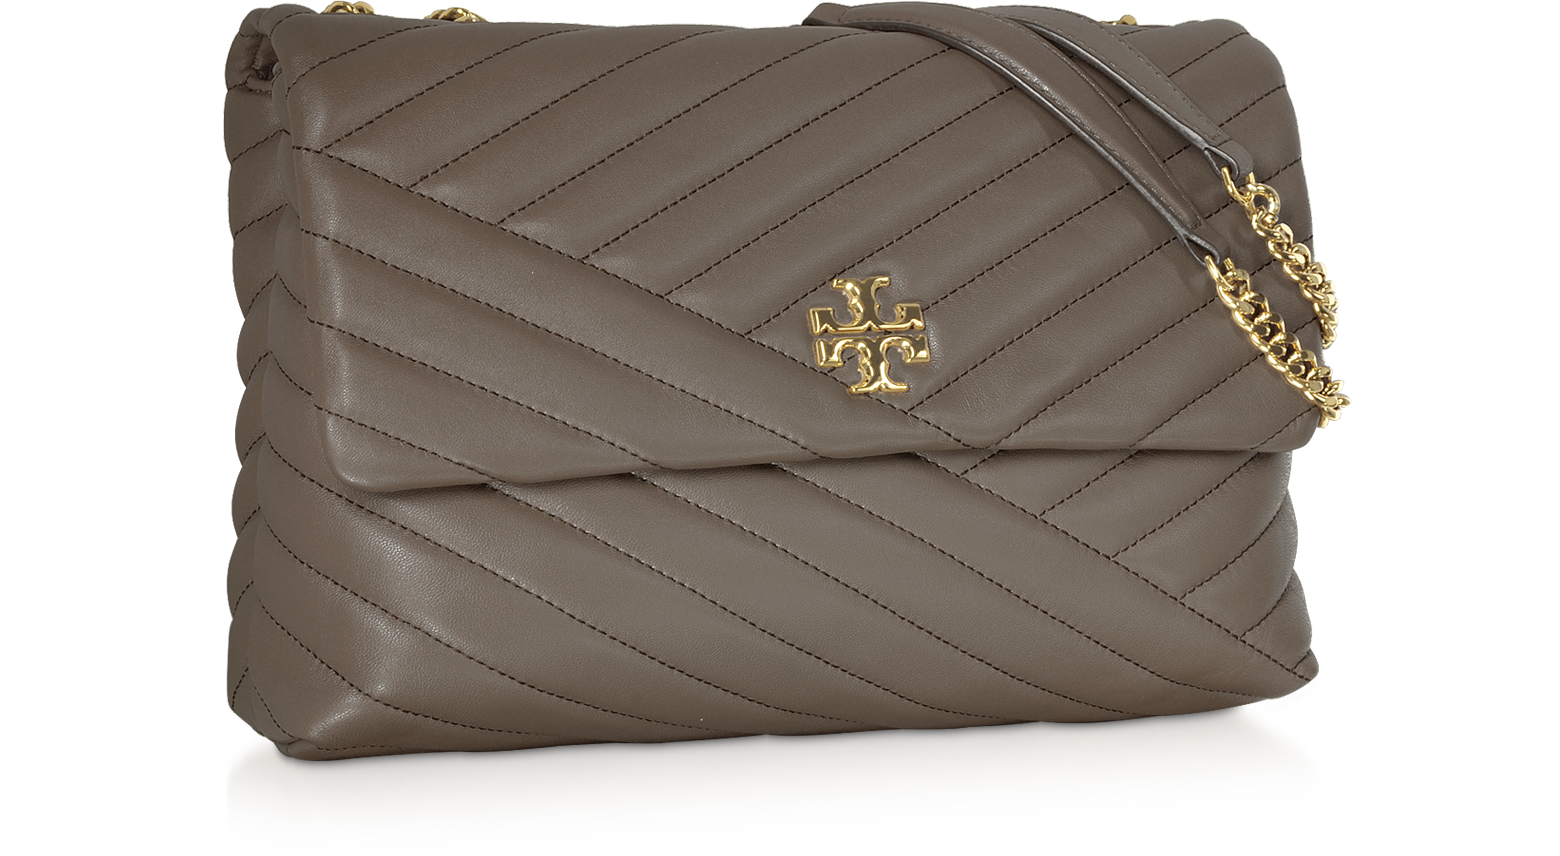 NWT Tory Burch Chevron Quilted Bag for Sale in Phoenix, AZ - OfferUp